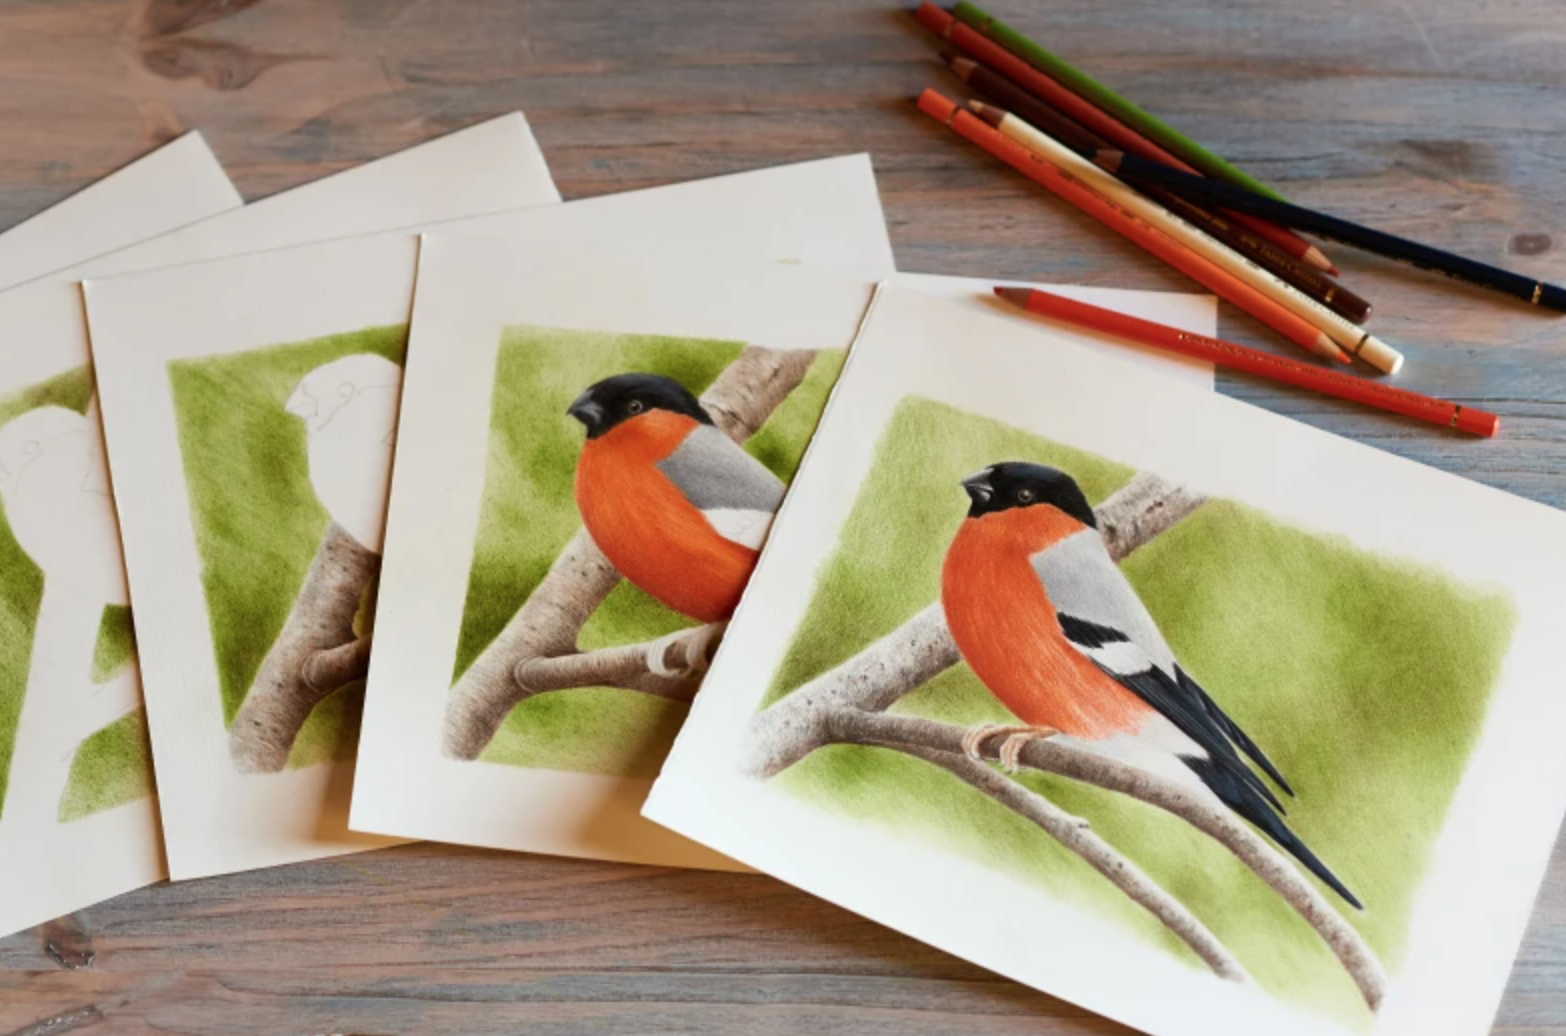 Get Started With Colored Pencils With These 7 BeginnerFriendly